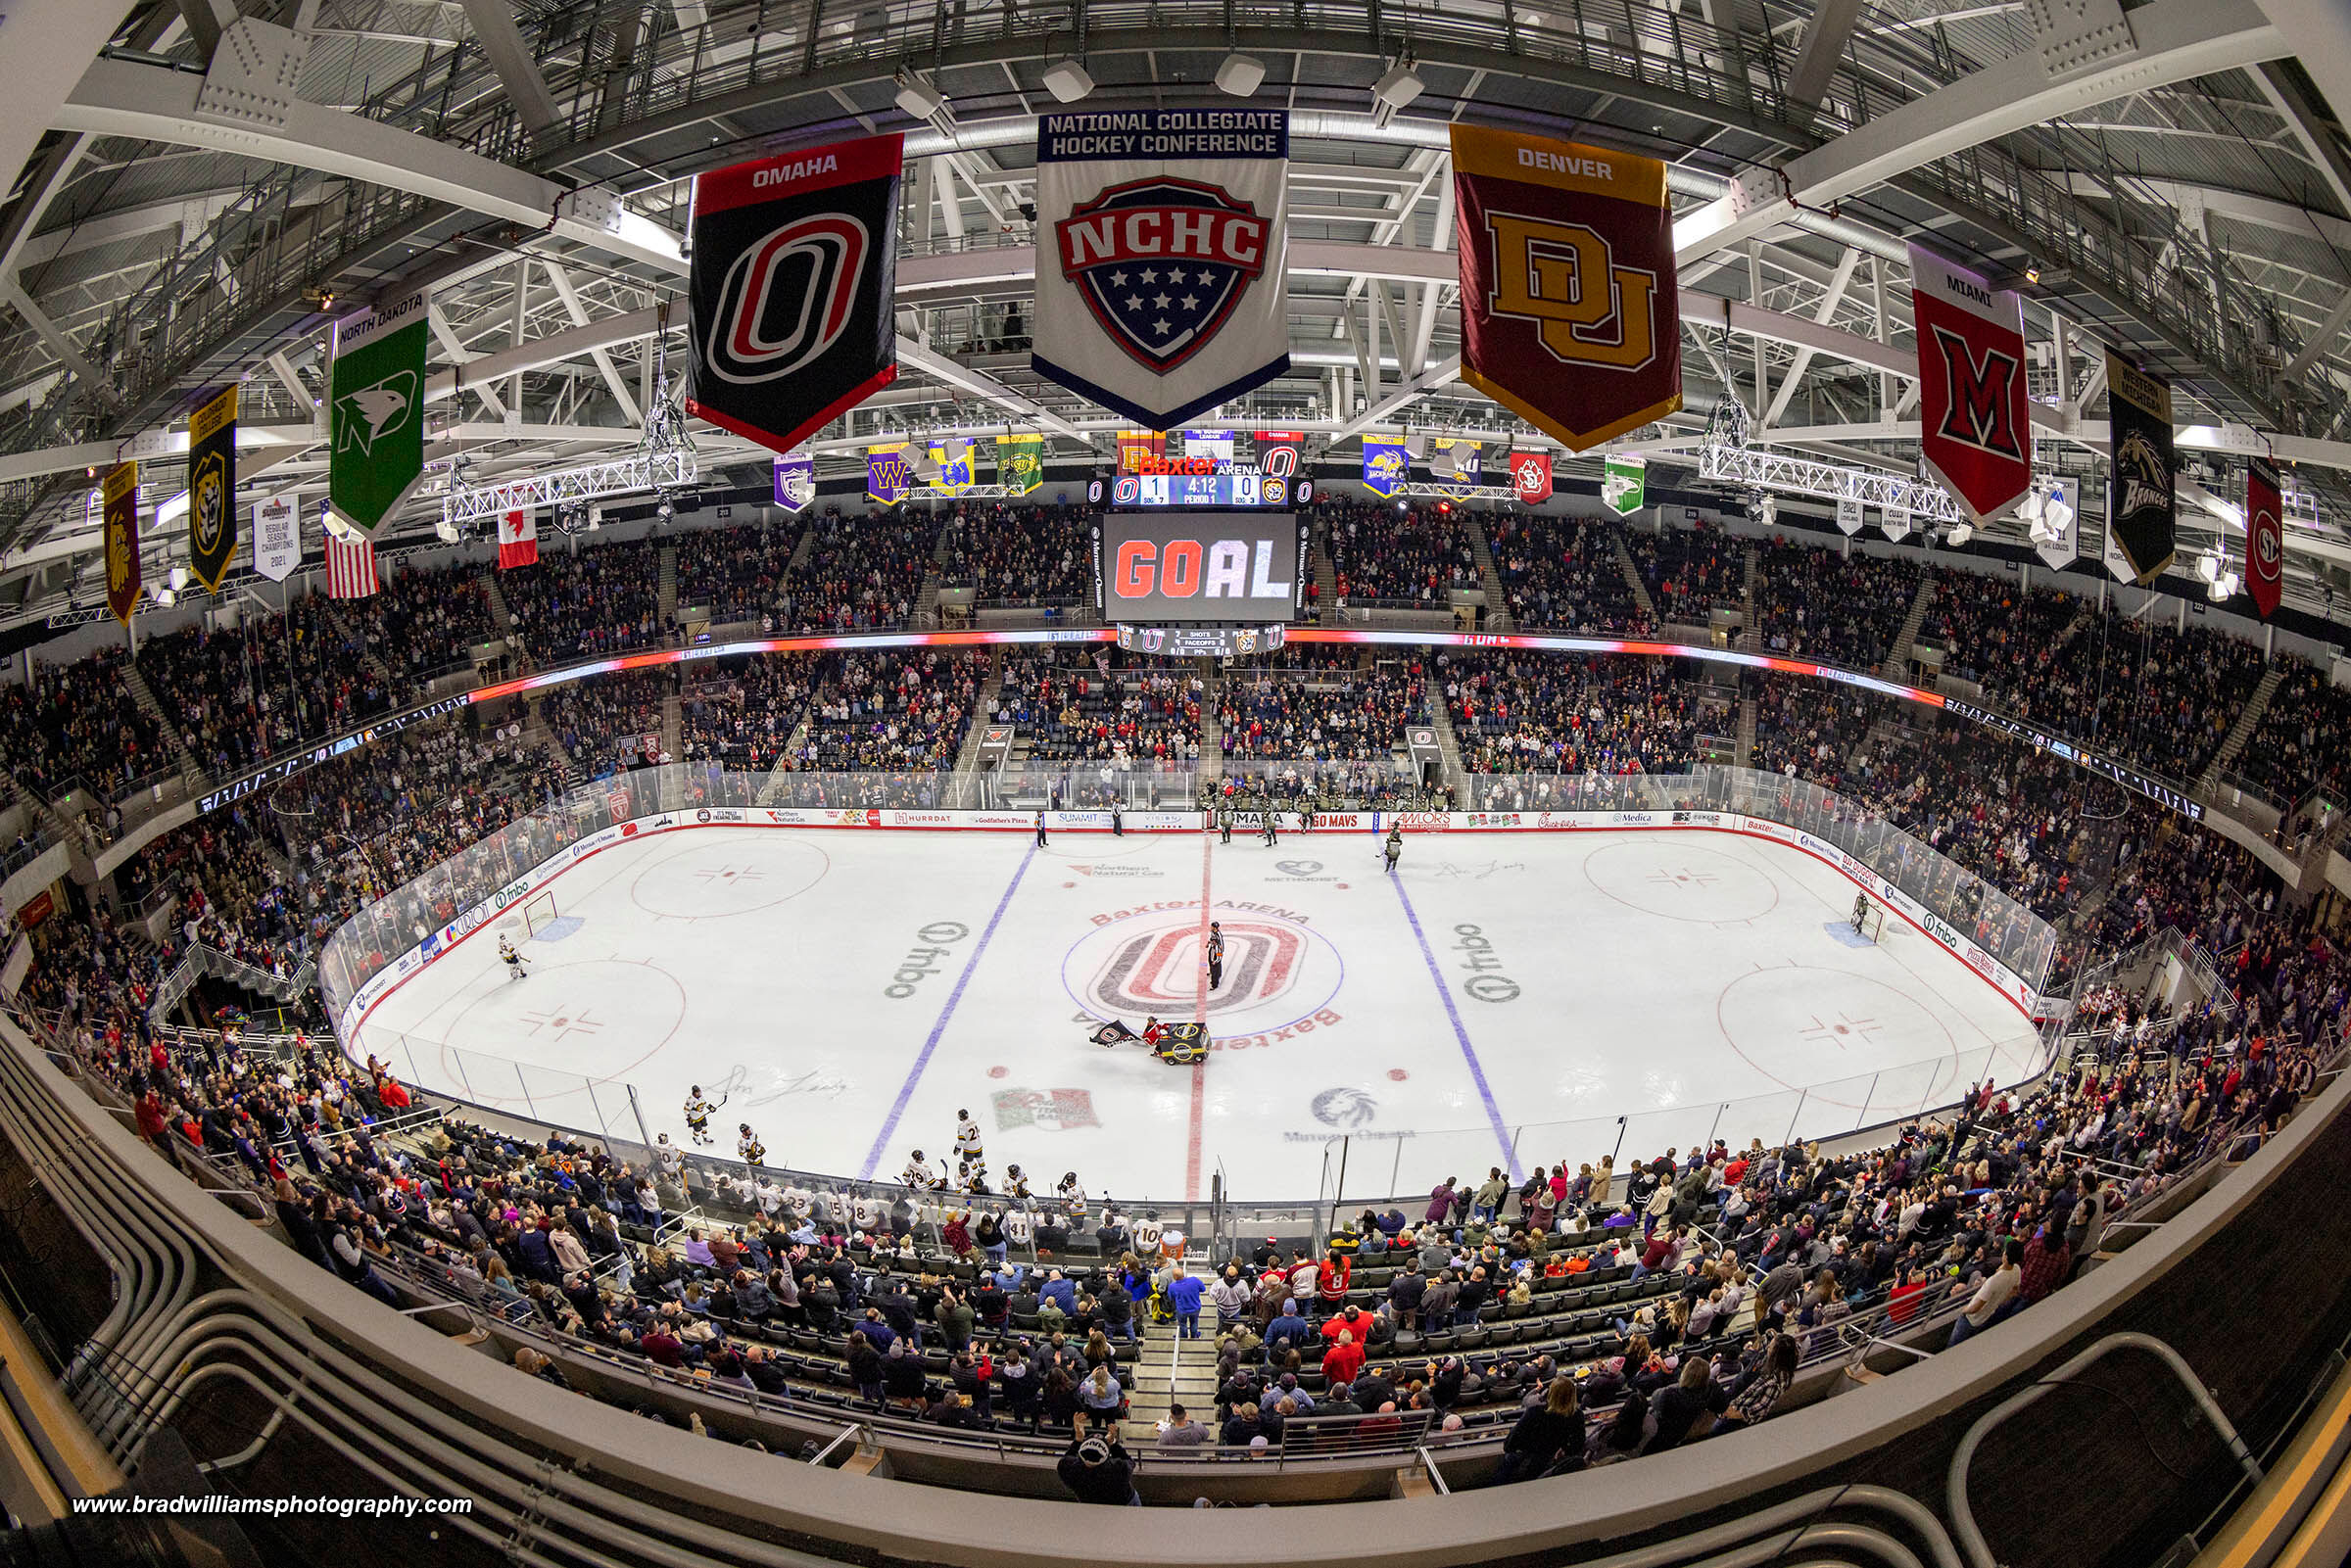 February 10th, 2023 brought the first sellout at the Baxter Arena in many years.